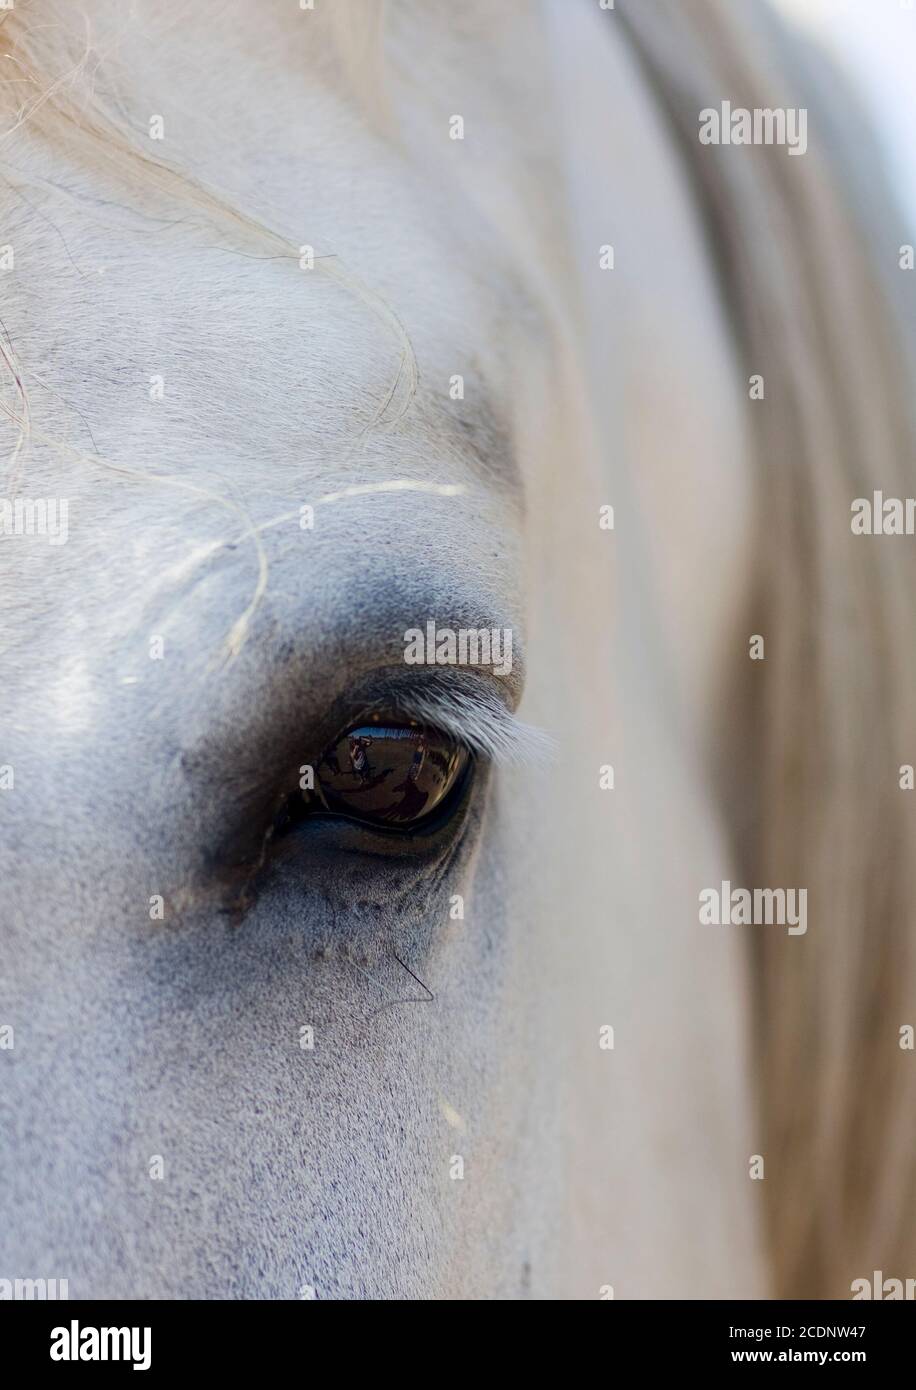 A closeup of the head of a white Percheron horse. His eye reflects the scene before him and he has beautiful long eye lashes. Stock Photo